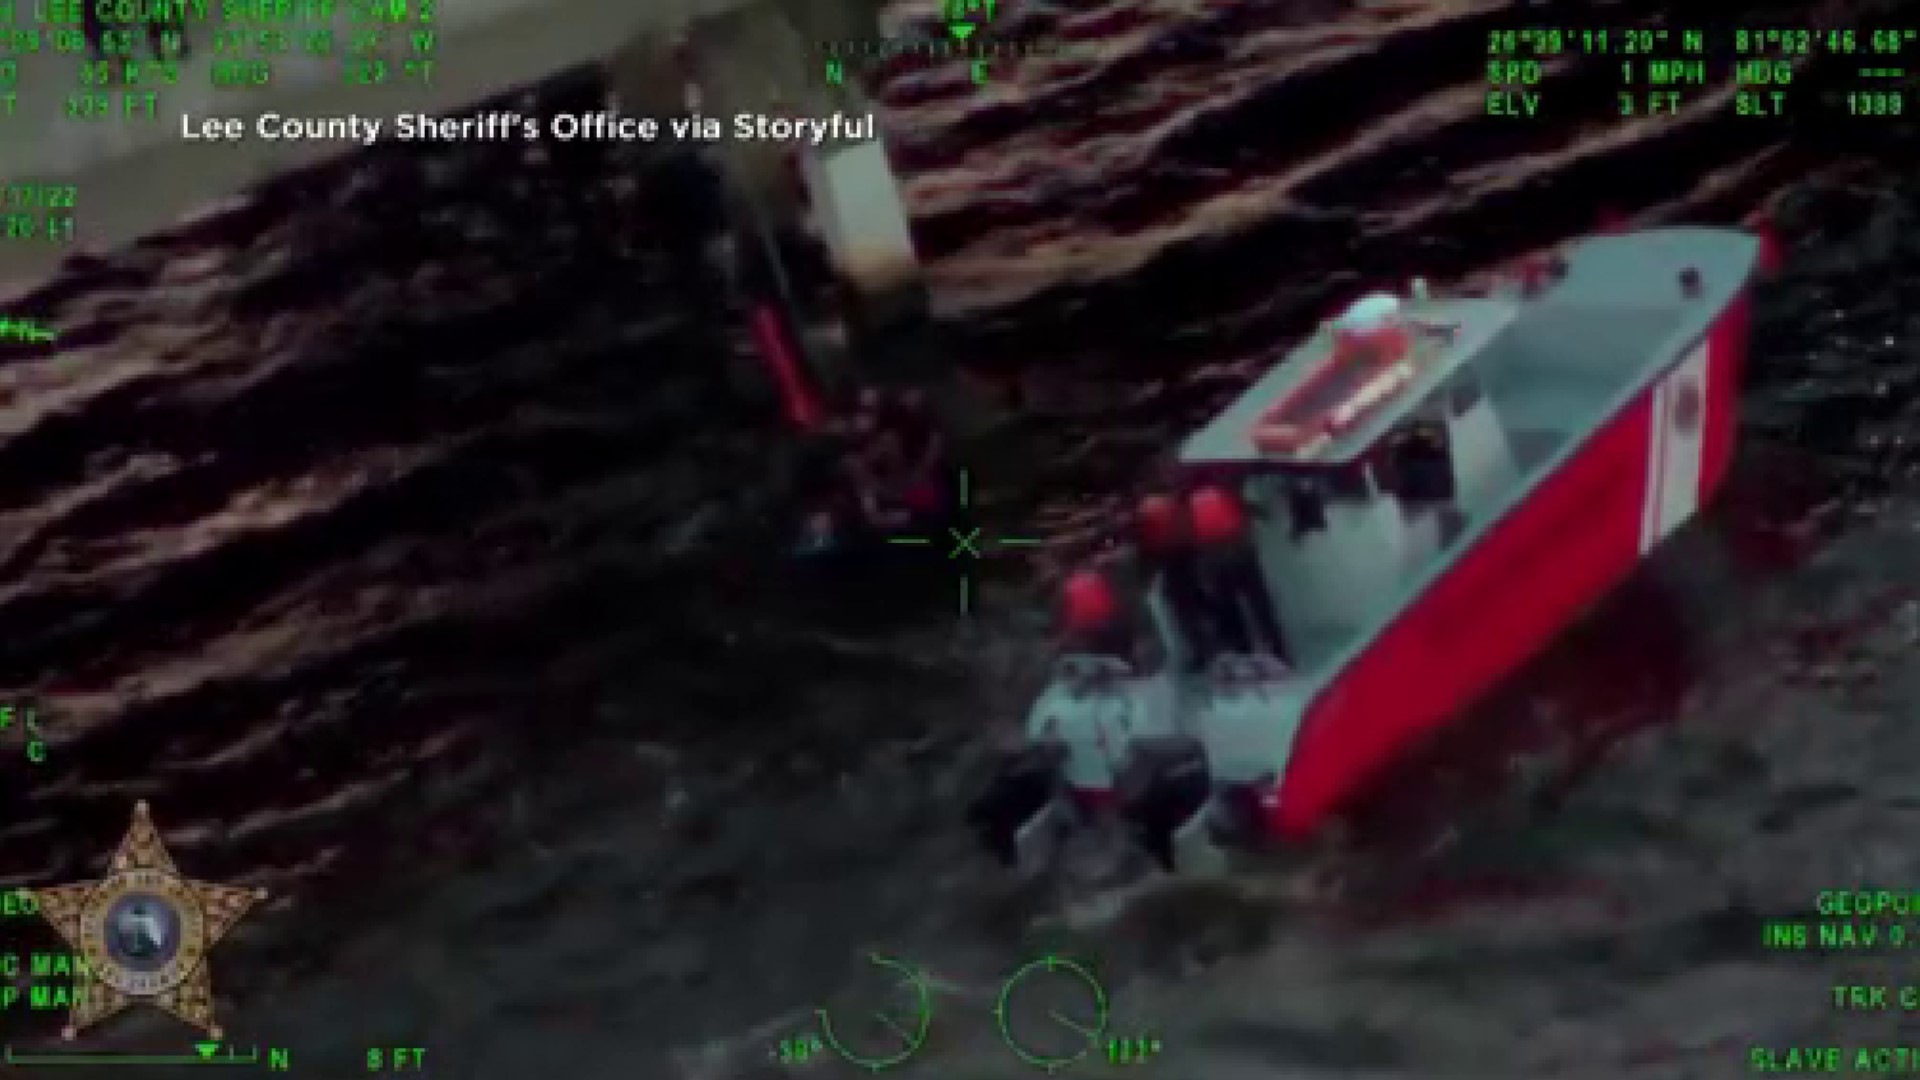 Footage released by the Lee County Sheriff's Office shows the moment the truck crashes off the bridge. Later, deputies are performing CPR on the man.